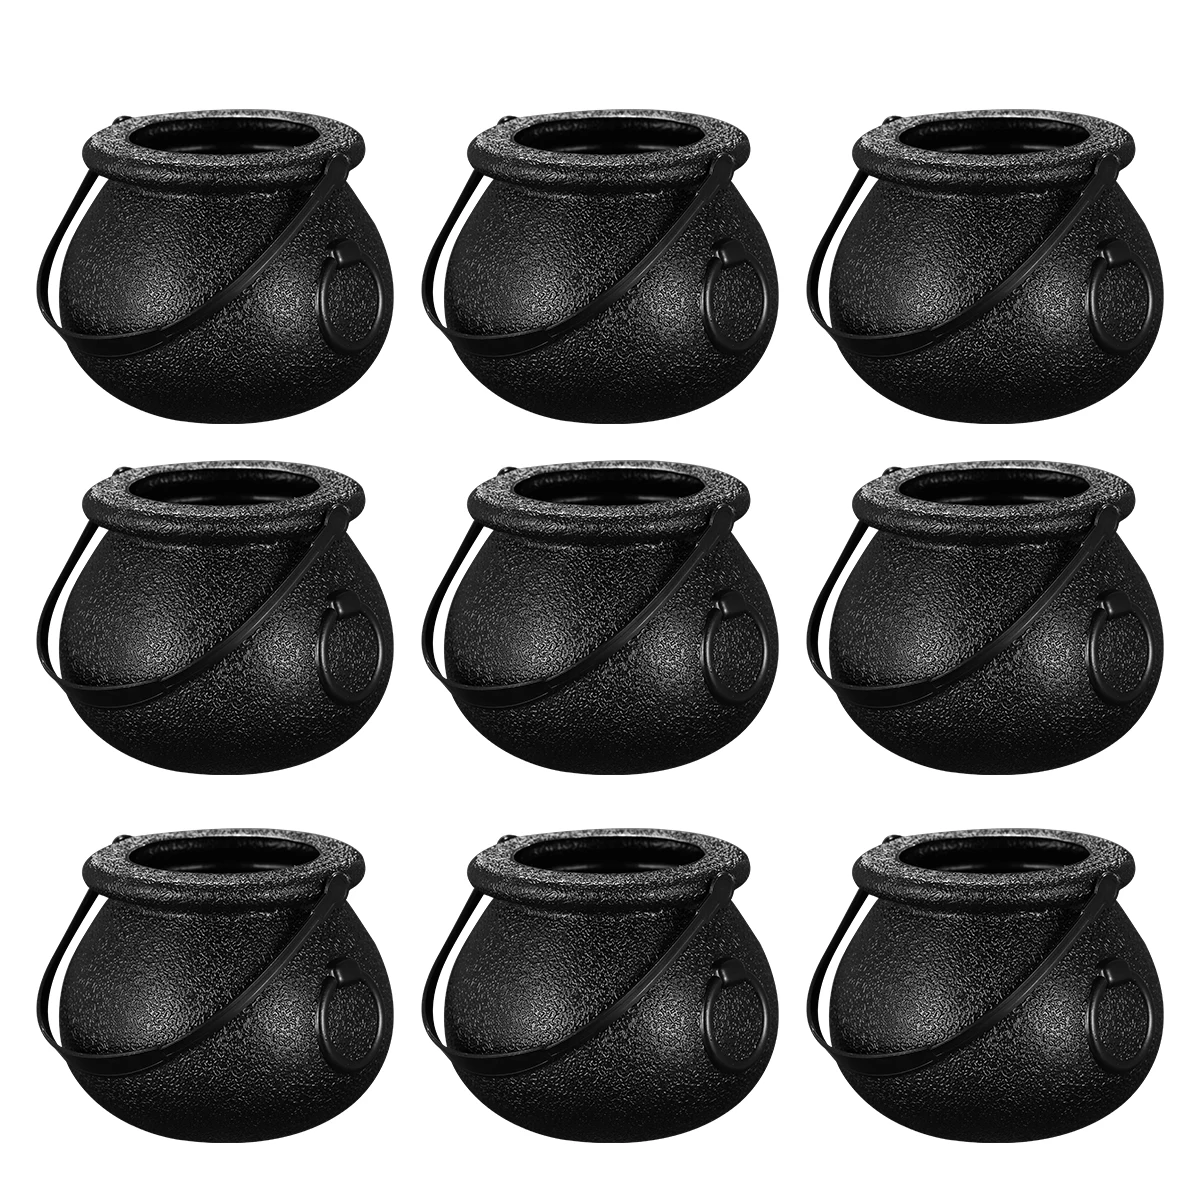 

Halloween Candy Bucket Cauldron Holder Or Trick Treat Witch Decorations Bowl Black Pot Witches Kettles Decor Global Plastic